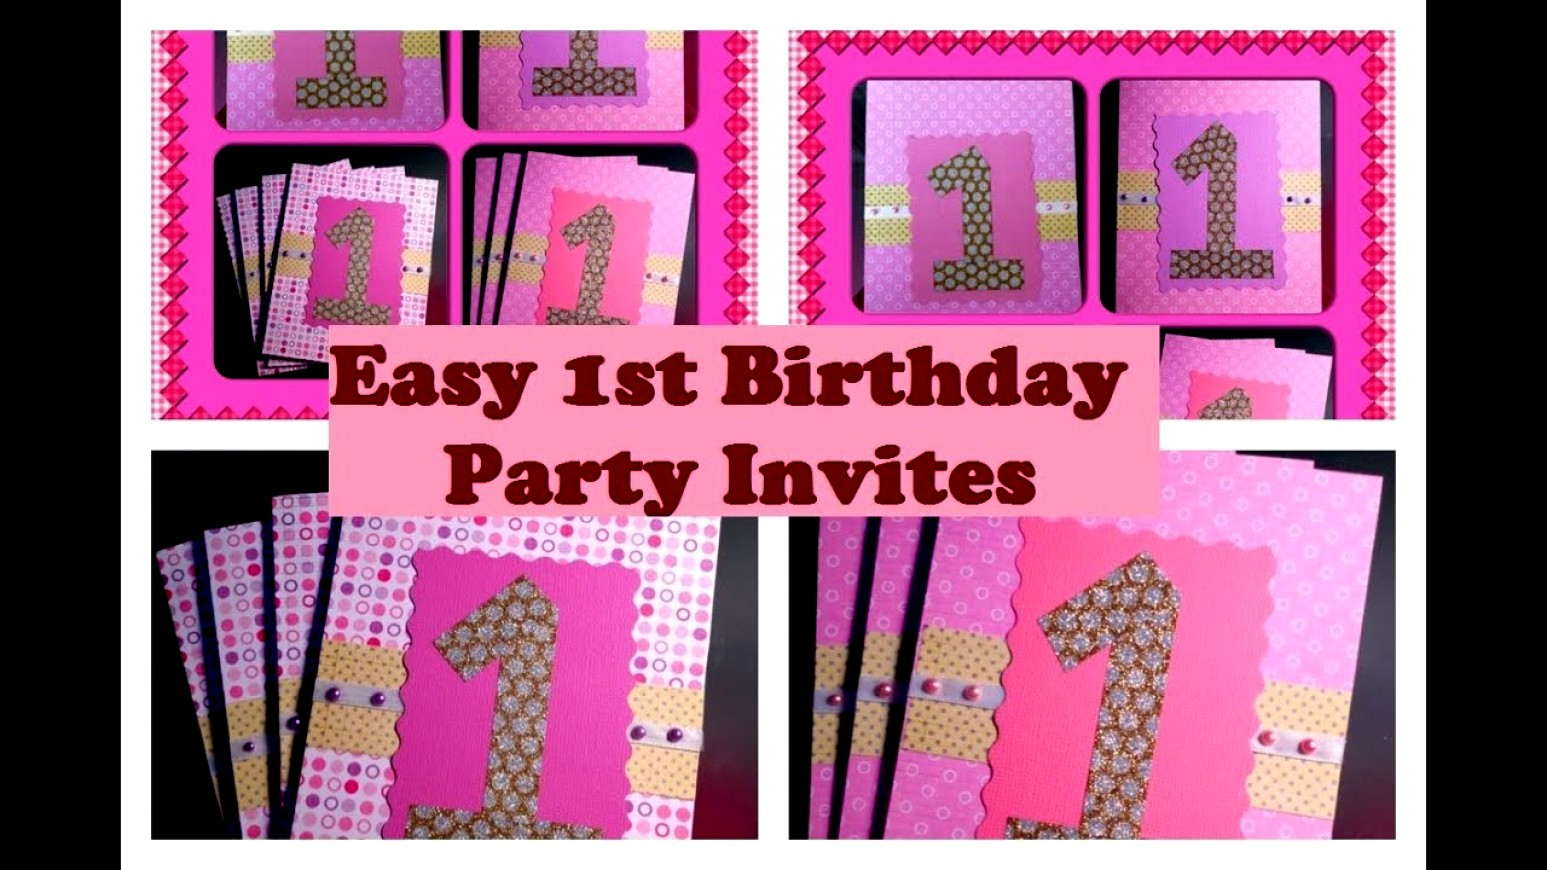 Invitation Card Ideas For Birthday Party Collection Of Handmade Birthday Invitation Cards Ideas Dinner Party